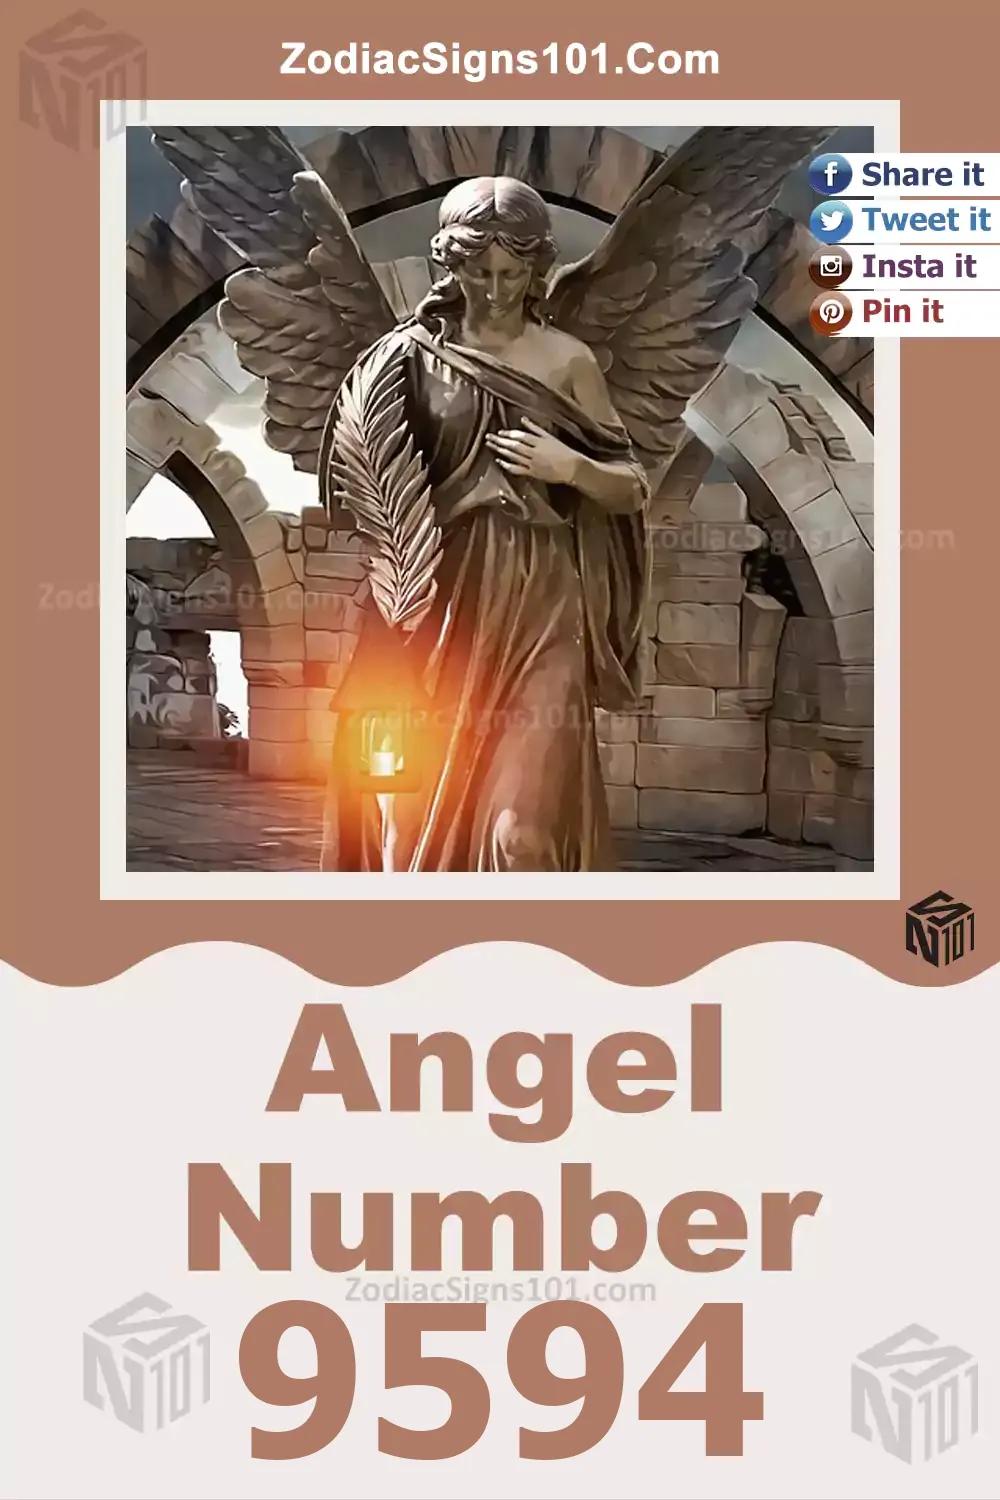 9594 Angel Number Meaning